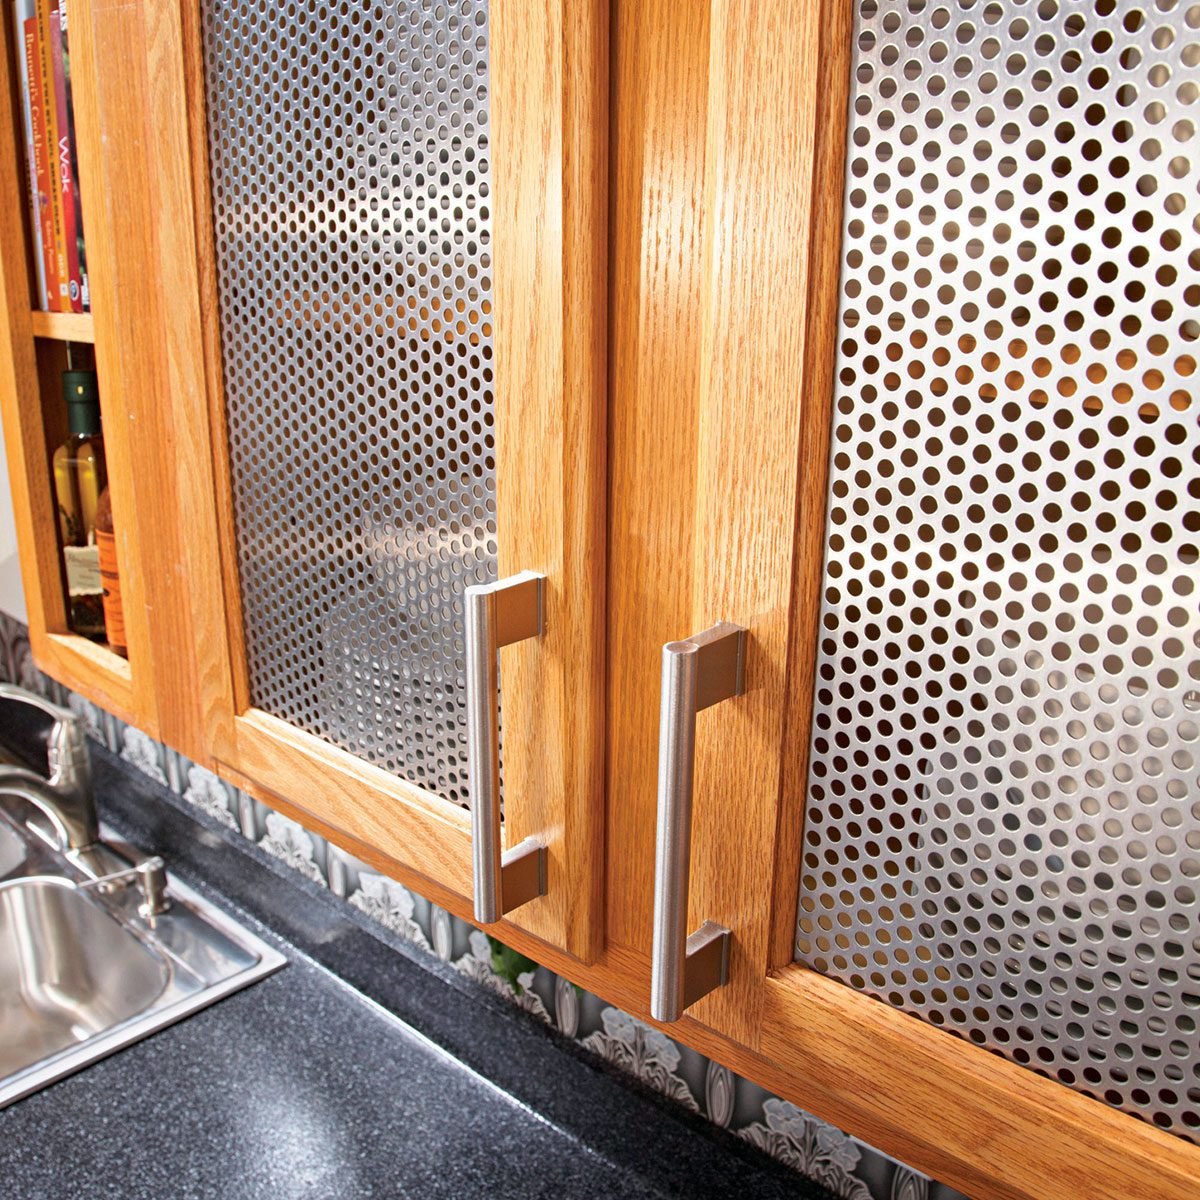 Another mesh option for cabinet doors entertainment center